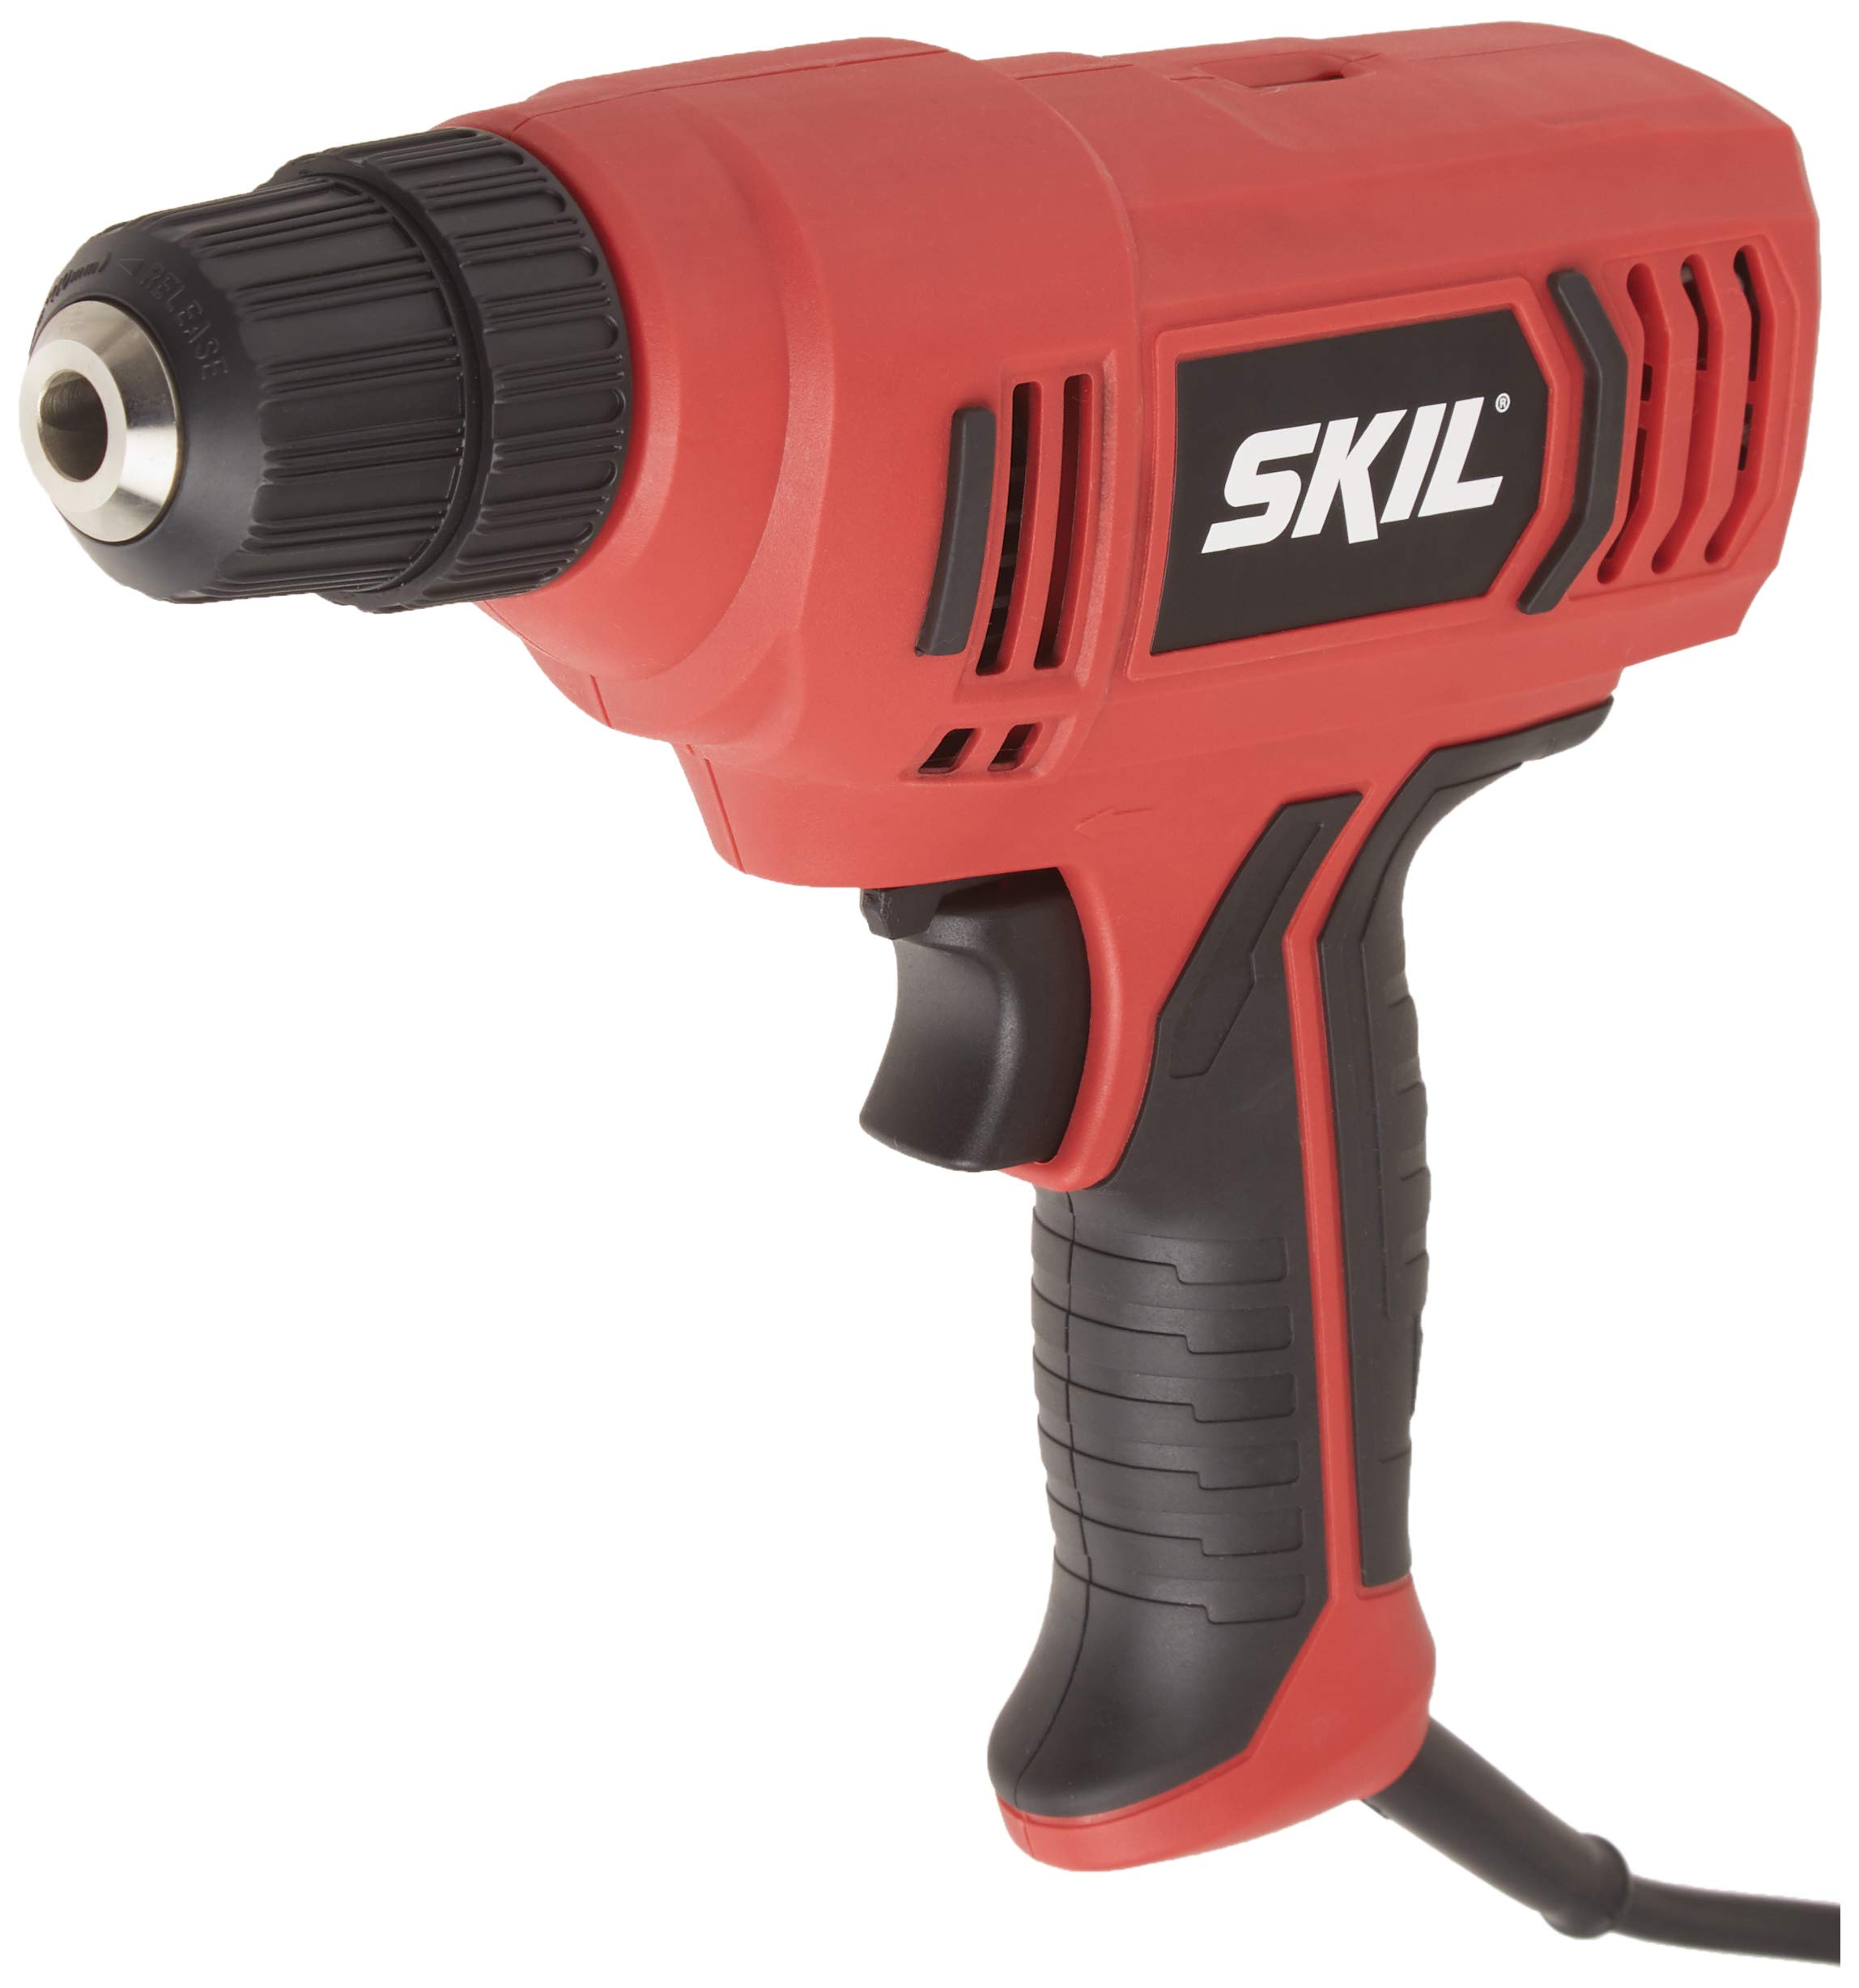 SKIL 6239-01 5.5 Amp Variable Speed Drill, 3/8